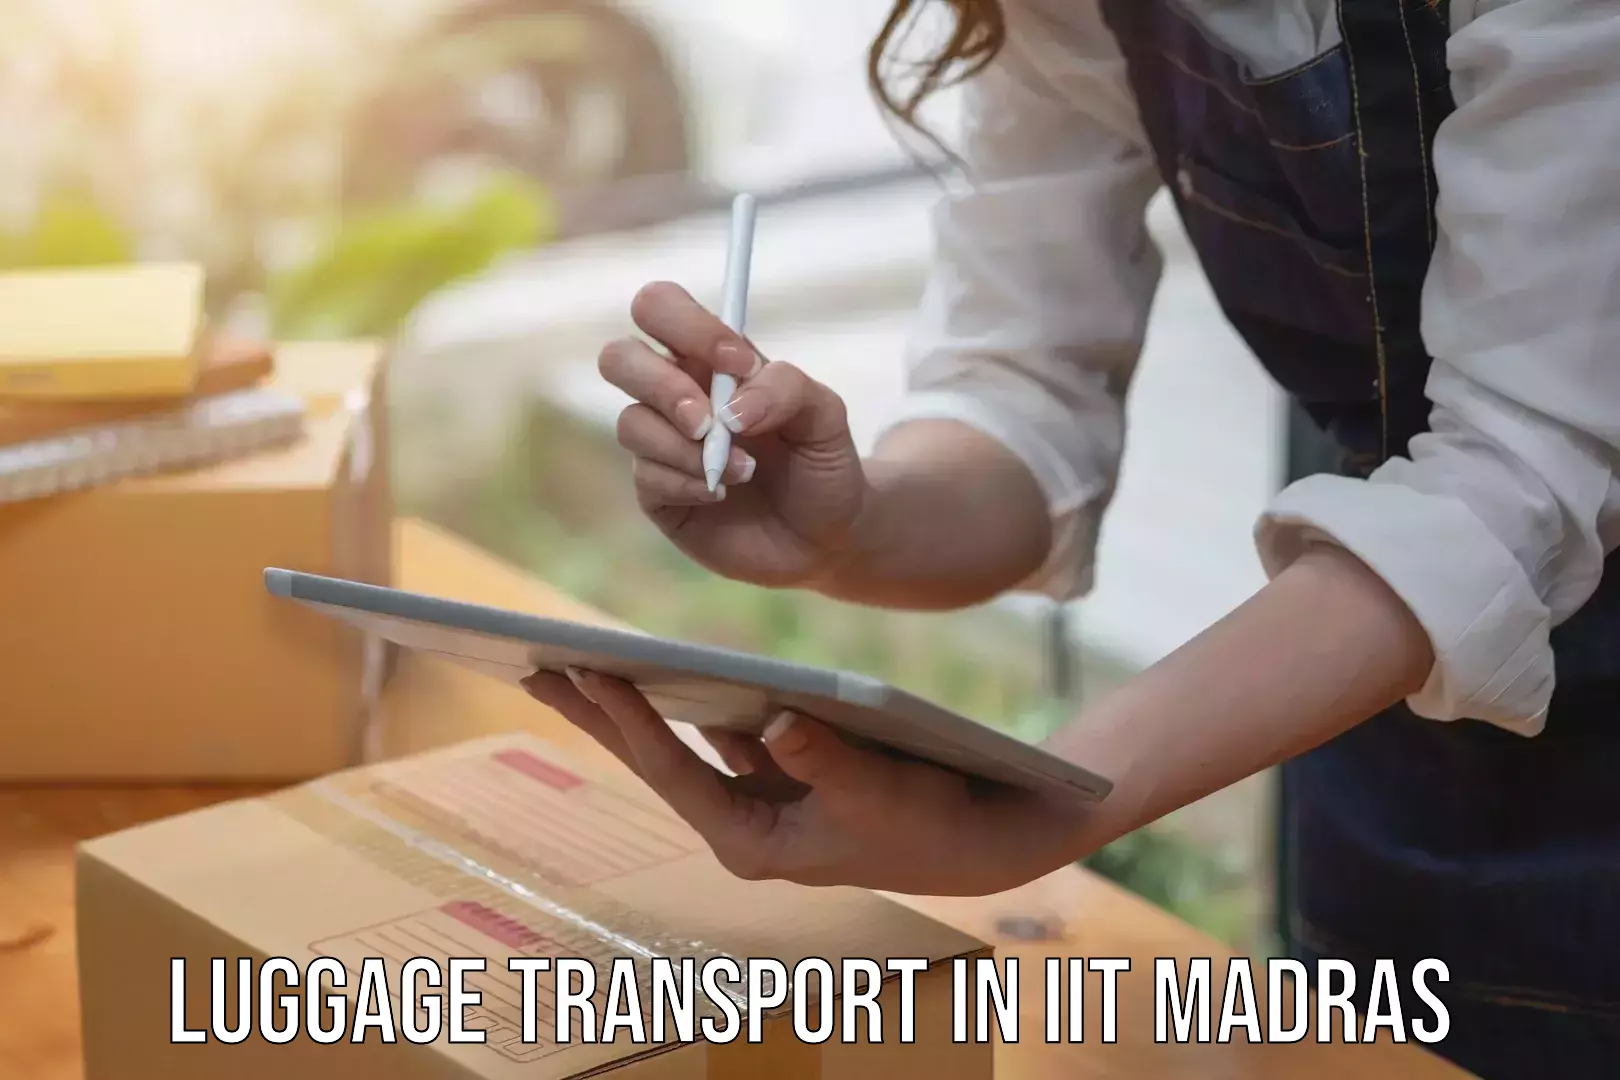 Luggage transport company in IIT Madras